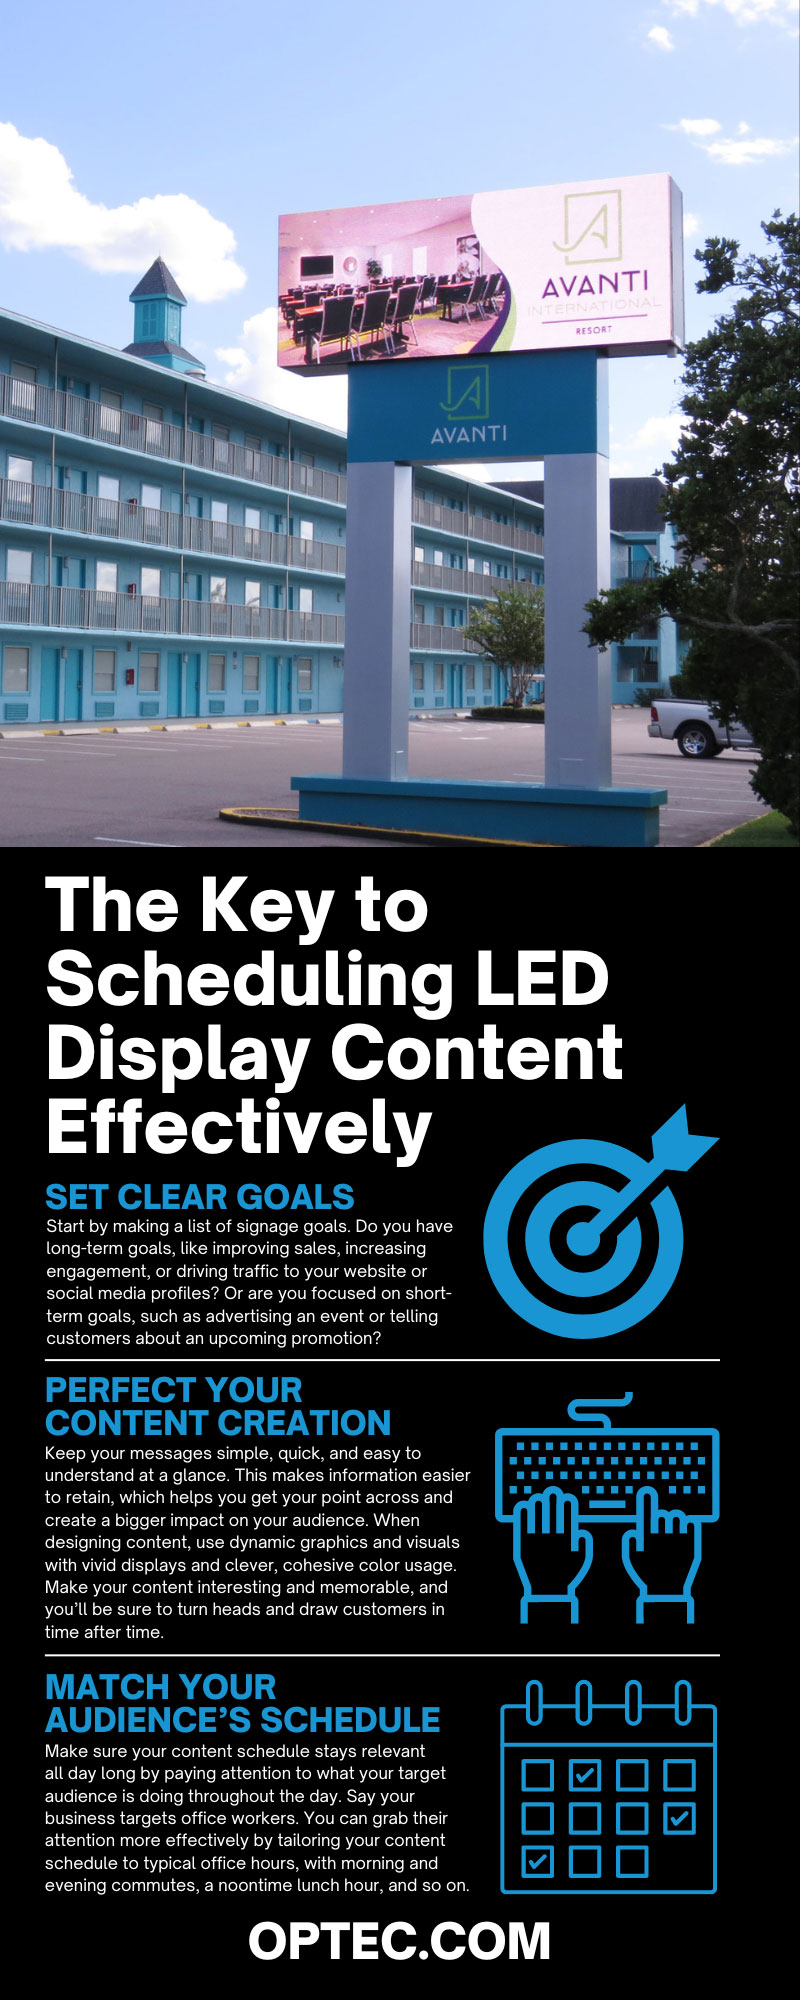 The Key to Scheduling LED Display Content Effectively